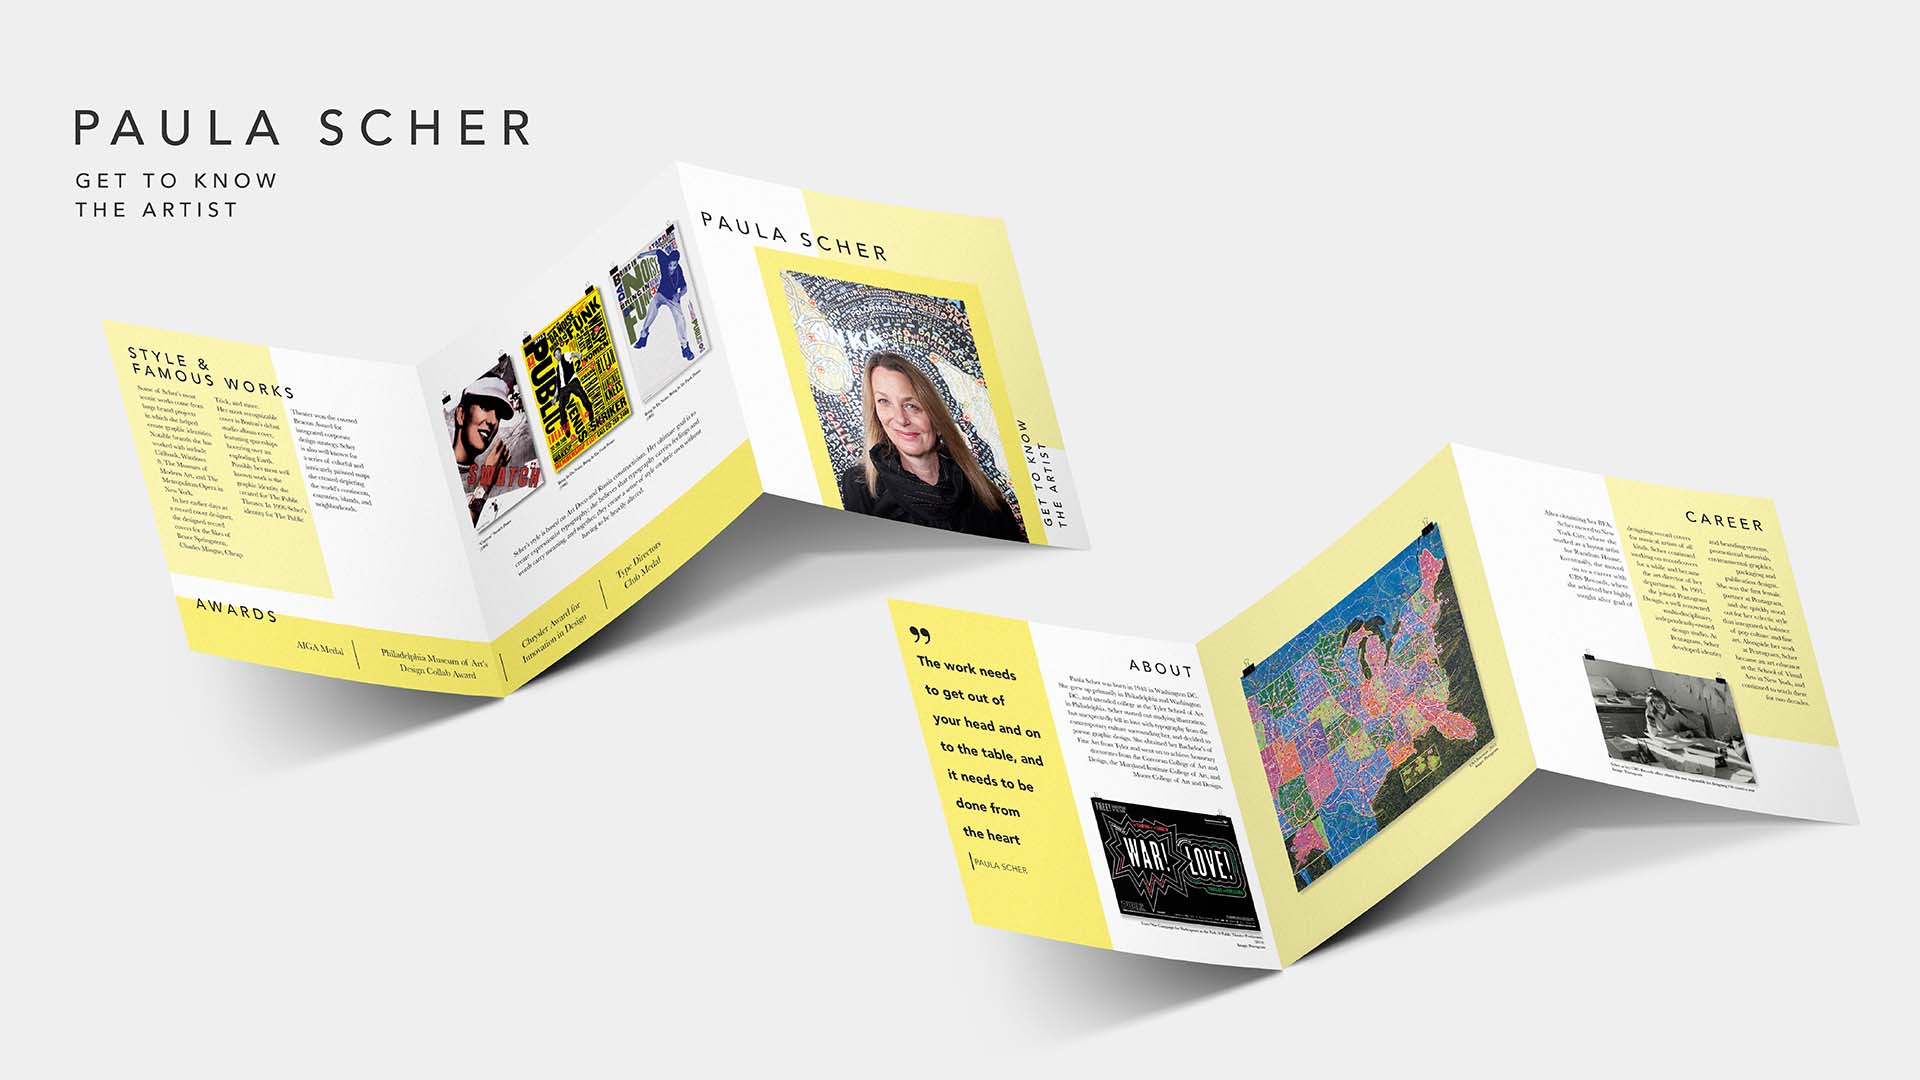  / “Paula Scher, Get to Know the Artist,” biography brochure, 24 x 8 inches, 2021. This brochure includes a short biography of Paula Scher, outlining her upbringing, career, style, awards, and artwork. 